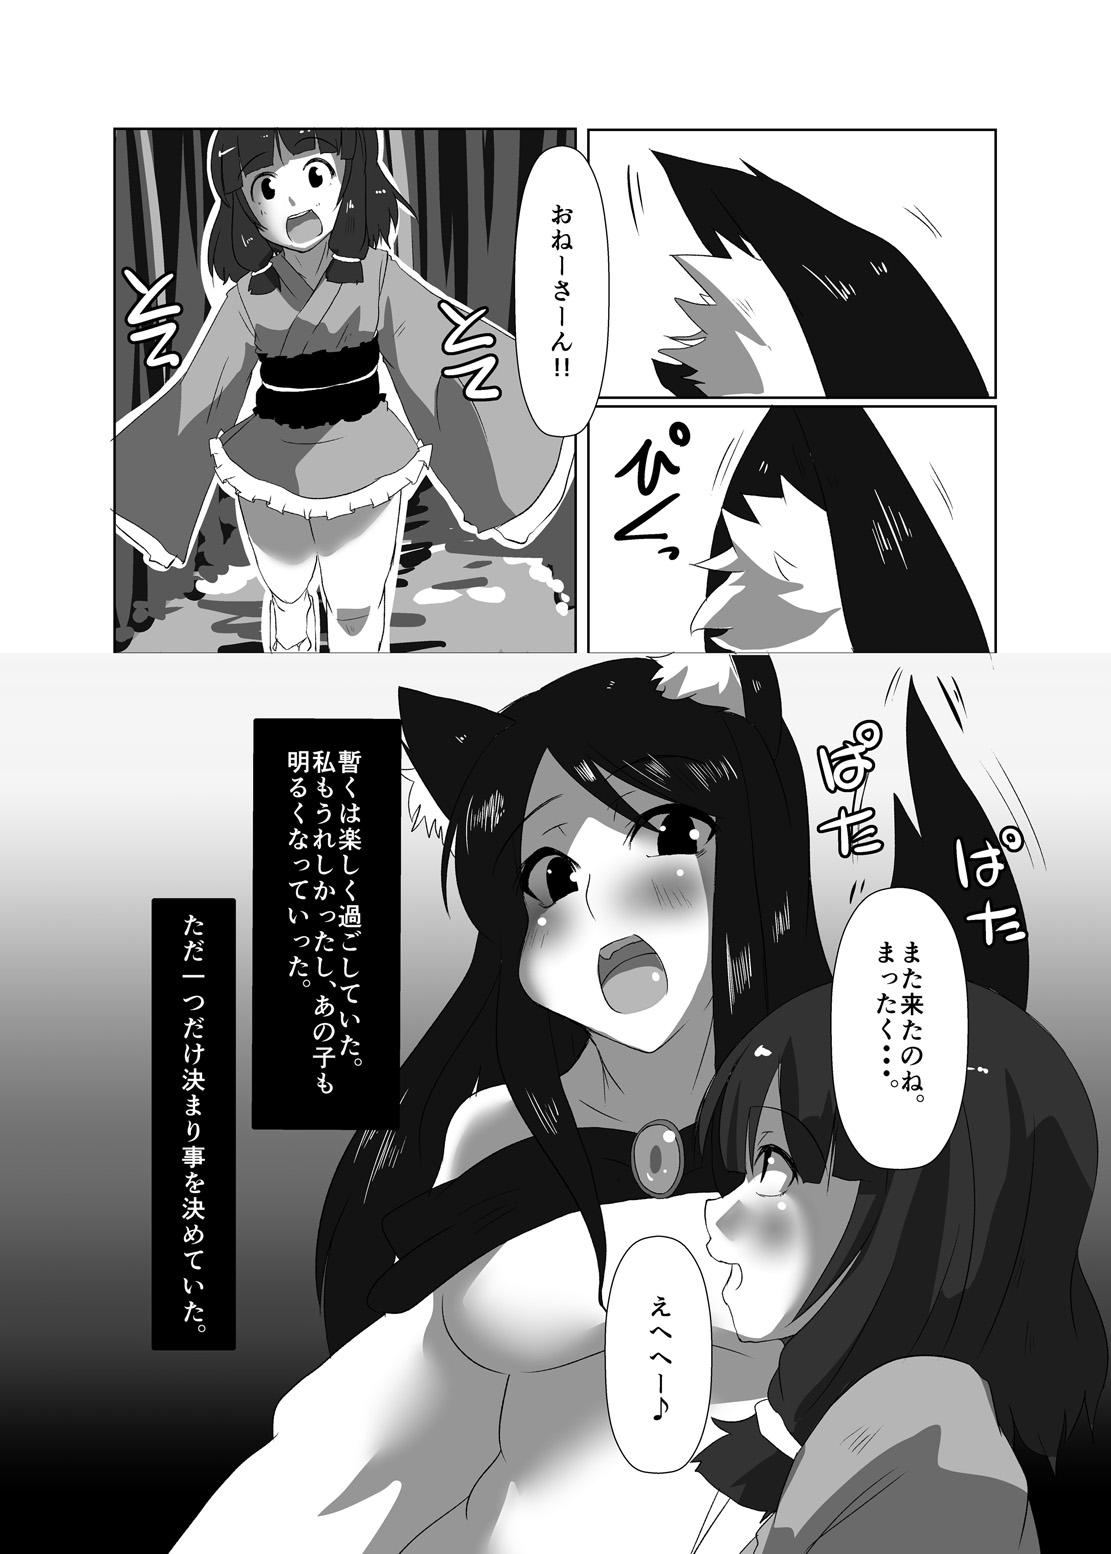 Tall ELonely Wolf no Onee-san - Touhou project Asian - Page 12